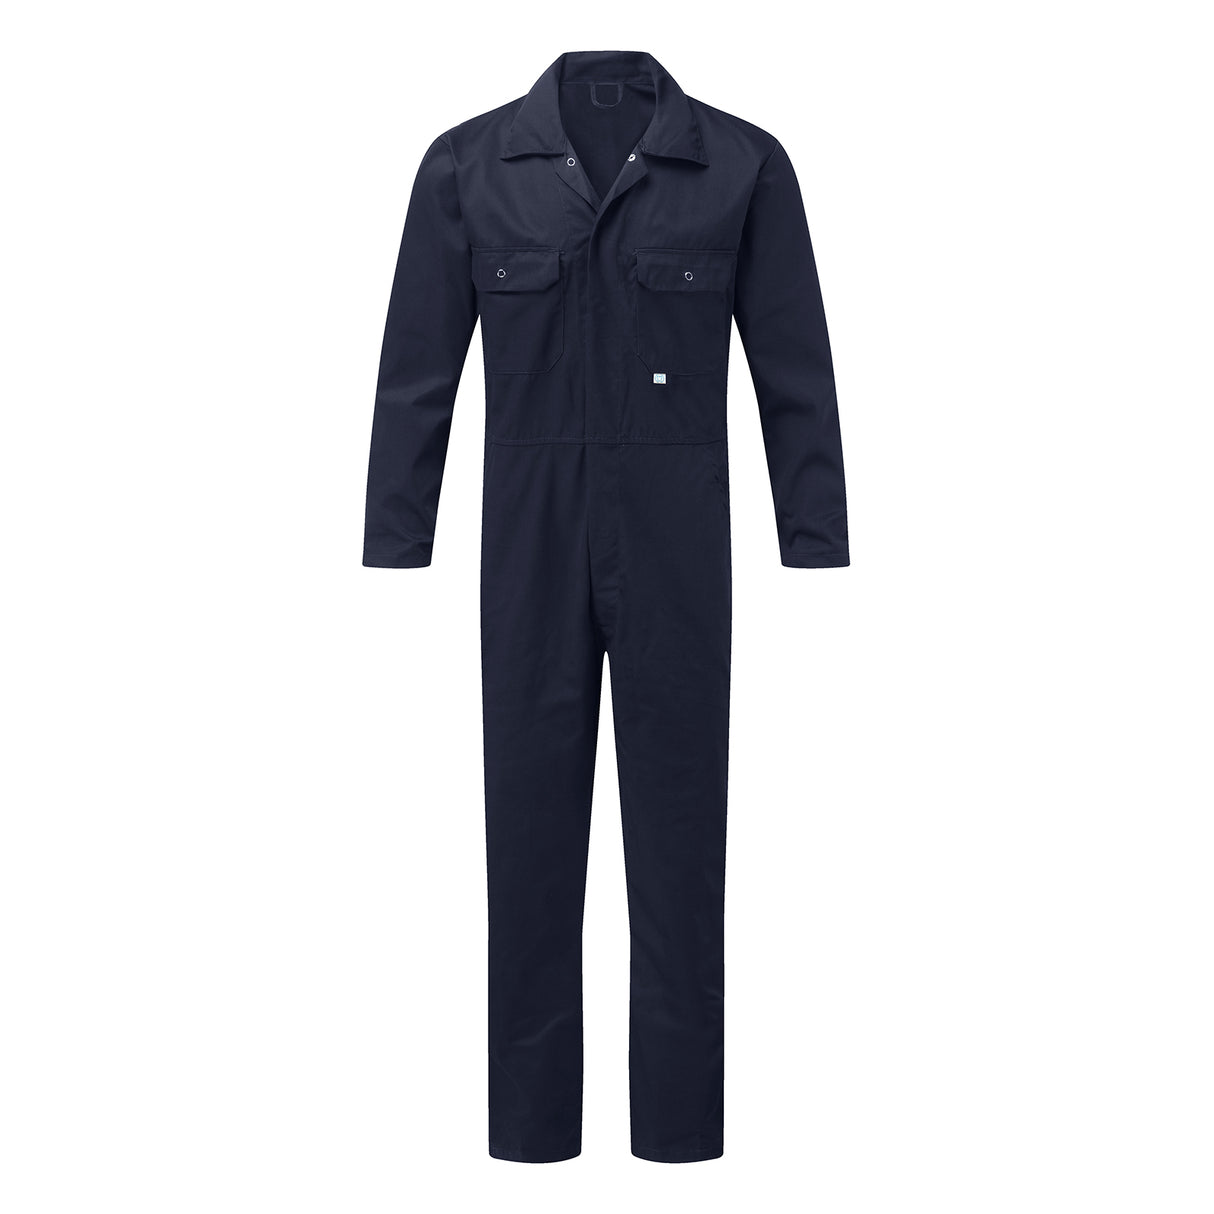 Fort Workwear Stud Front Coverall